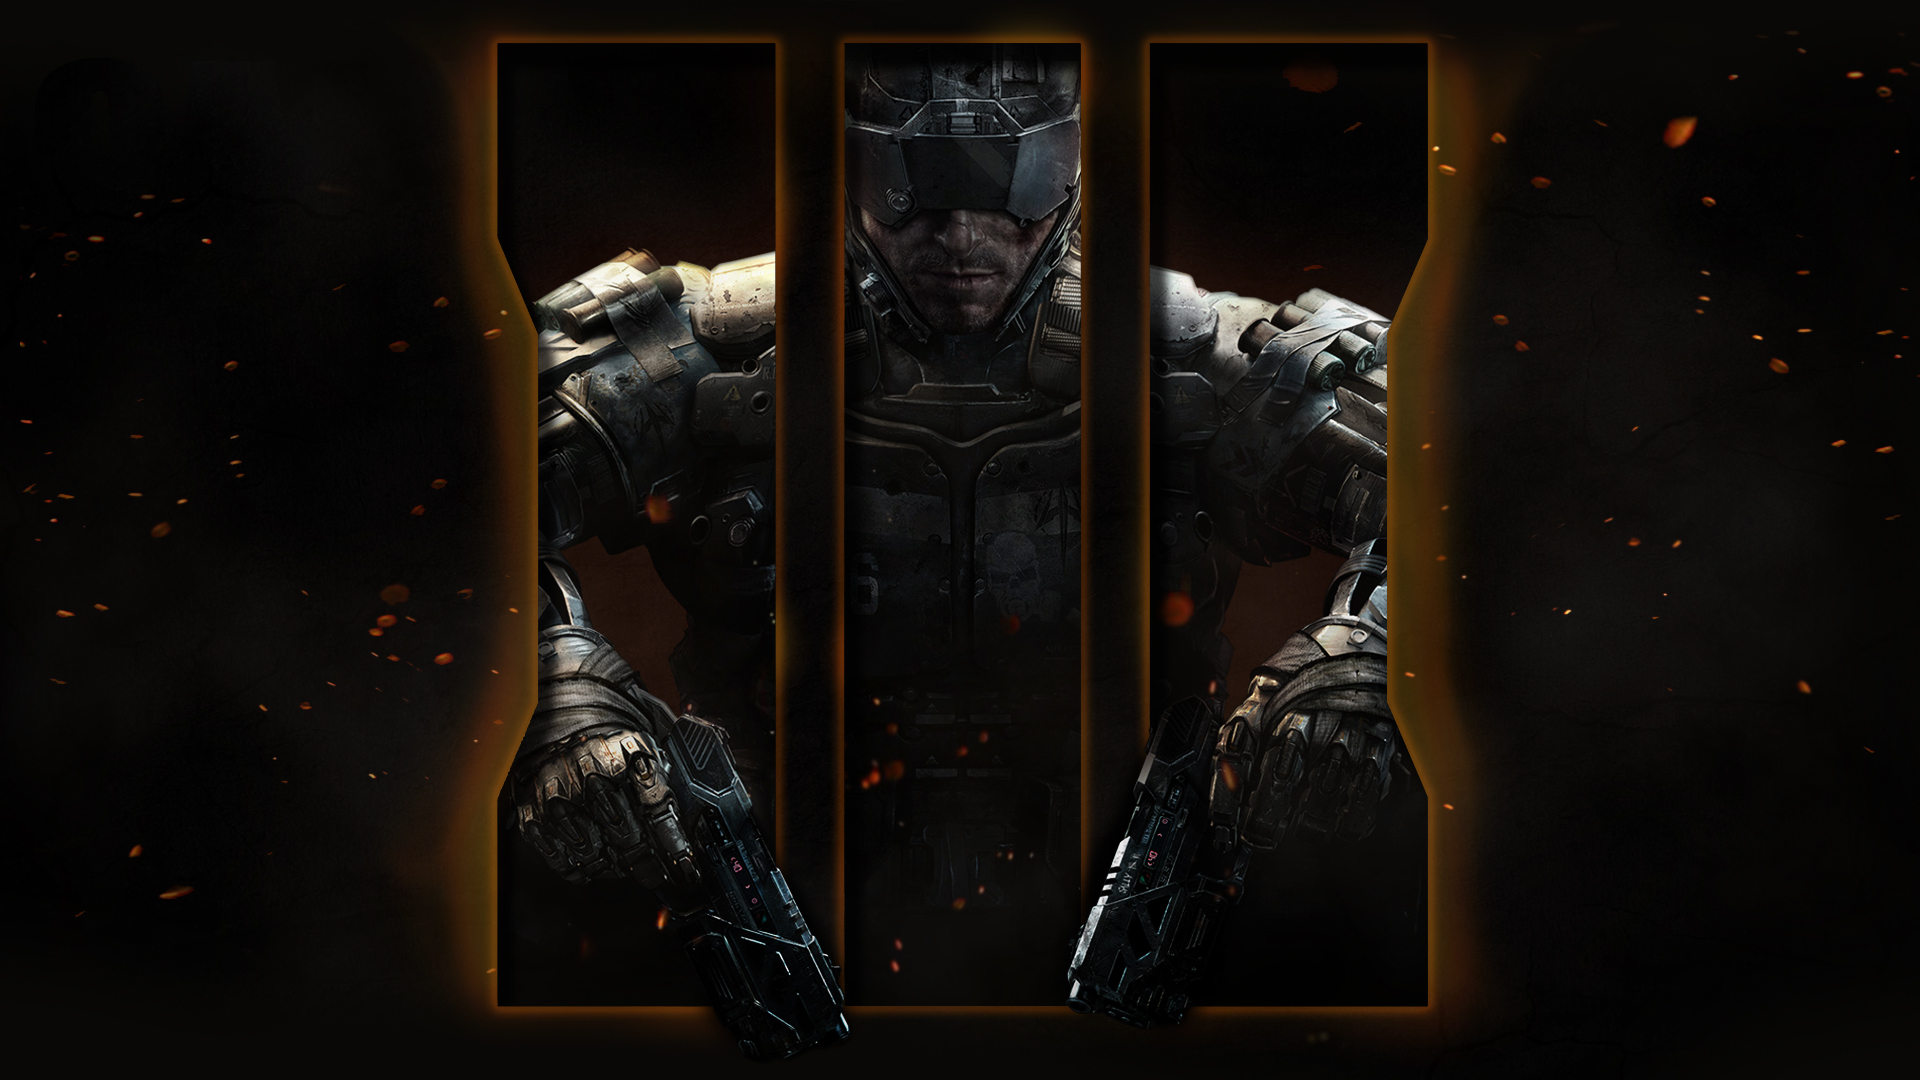 Call of Duty Black Ops 3 Wallpaper 04 by Toby Affenbude on